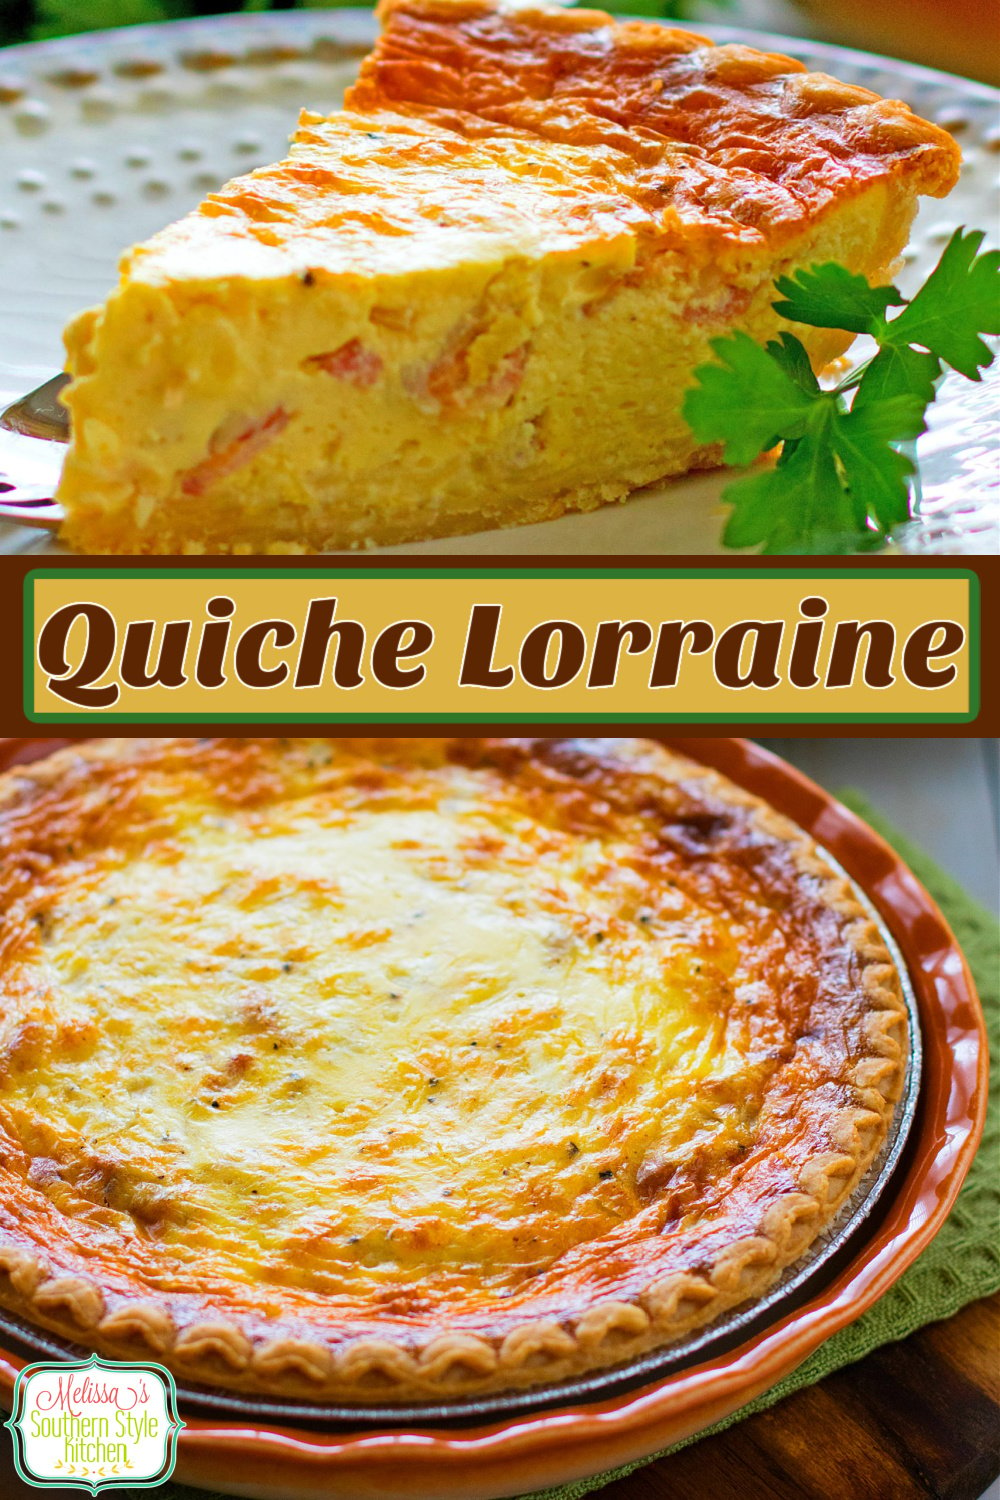 Quiche Lorraine features a smooth egg custard filled with Gruyere cheese, bacon and onion for a classic trio of flavors. #quichelorraine #quiche #quiche recipes #baconquiche #brunch #holidayrecipes #easterbrunch #christmasbrunch #thanksgivingbrunch #mothersday #breakfast #southernfood #southernrecipes #melissassouthernstylekitchen via @melissasssk